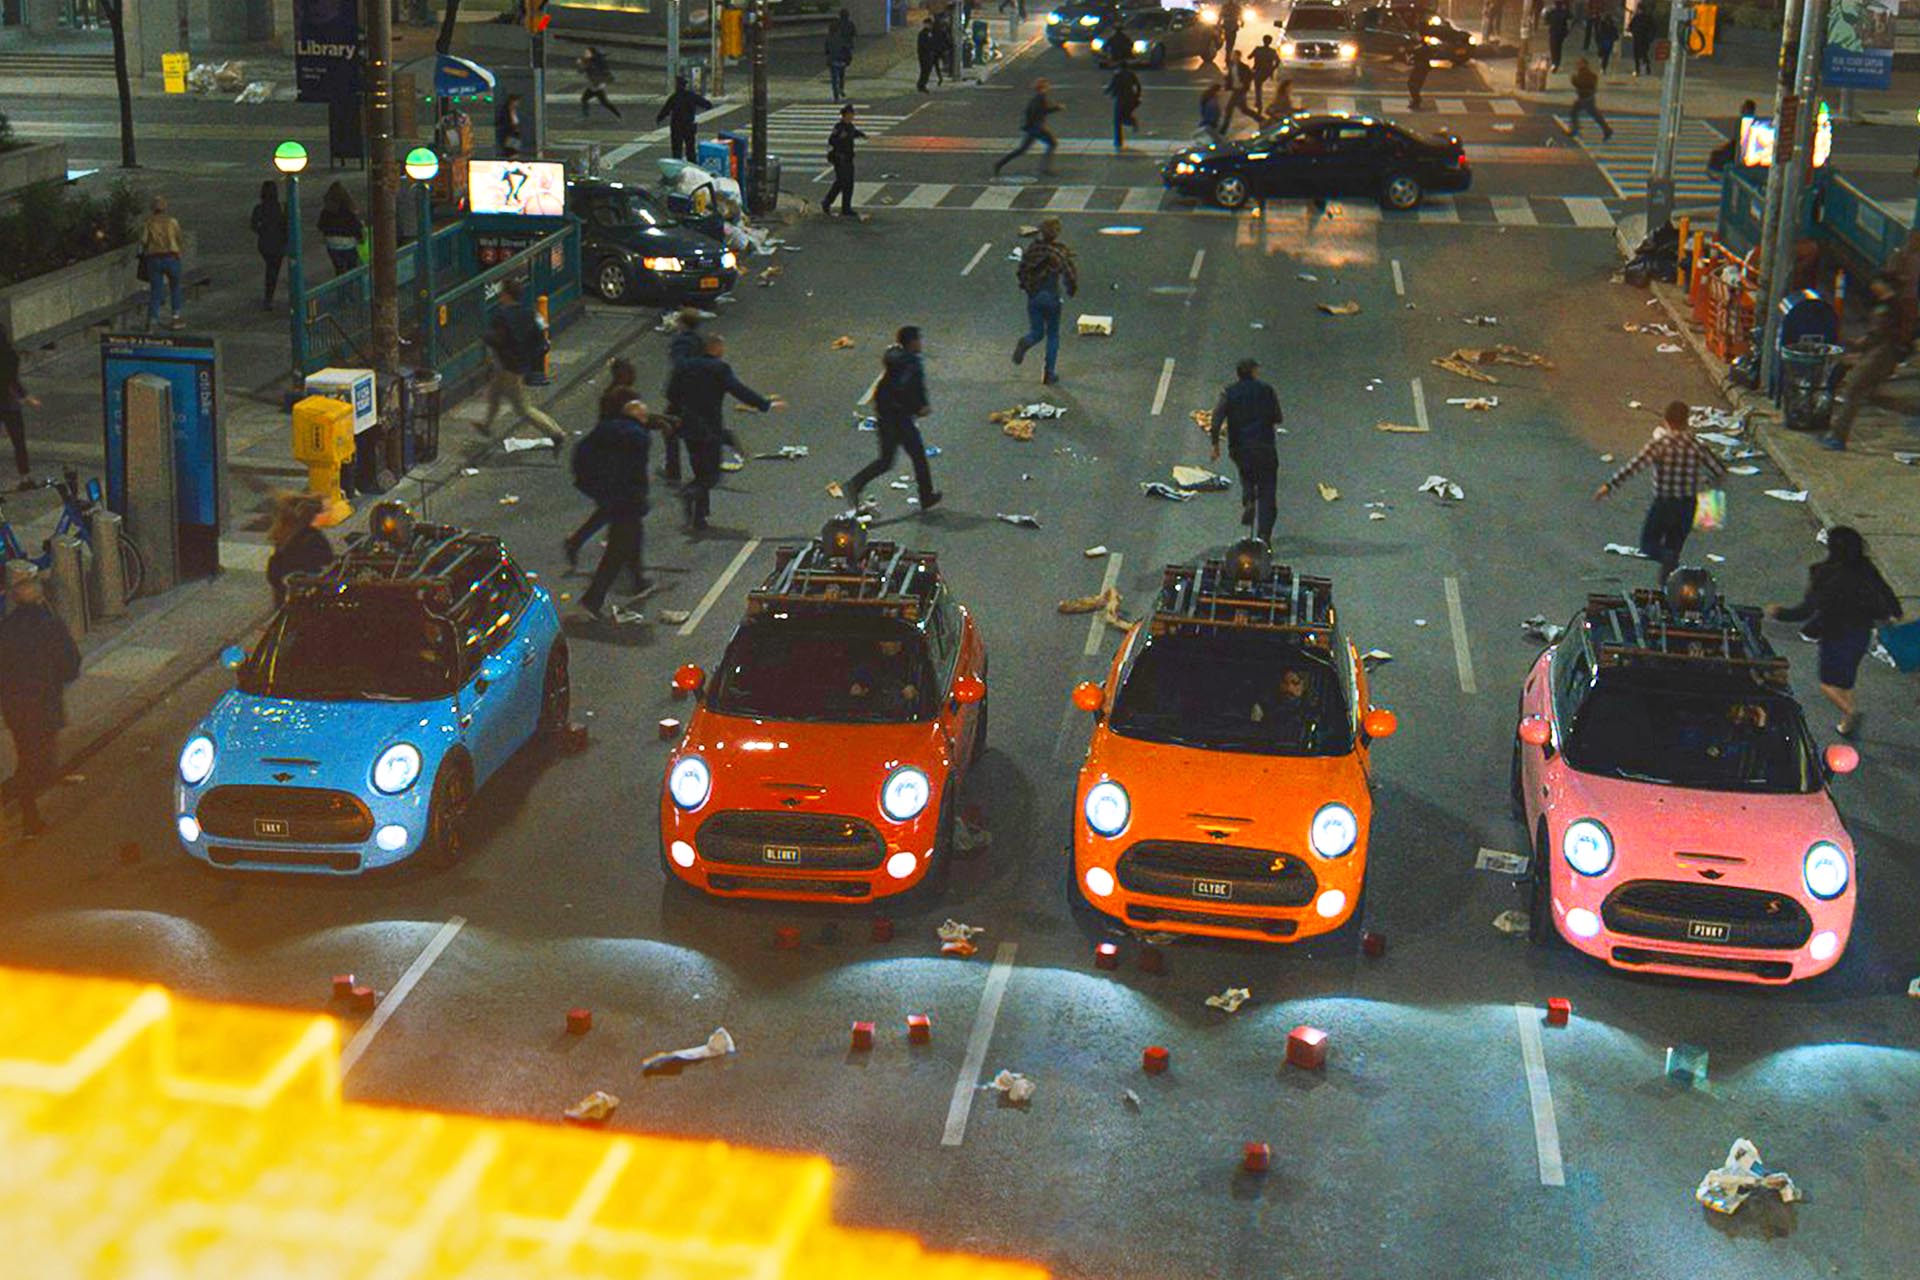 Talk about perfect casting. In the forthcoming movie <i>Pixels</i>, Adam Sandler and friends have to save the Earth from being gobbled up by a giant Pac-Man. And who are Pac-Man's mortal enemies? The four ghosts, of course – Inky, Pinky, Blinky and Clyde. So our heroes climb into Mini Coopers – whose ‘faces’ actually do resemble the ghosts, at least more so than any other car. Each Mini is painted in a specific ghost colour, with a matching licence plate featuring the aforementioned names of the ghosts.